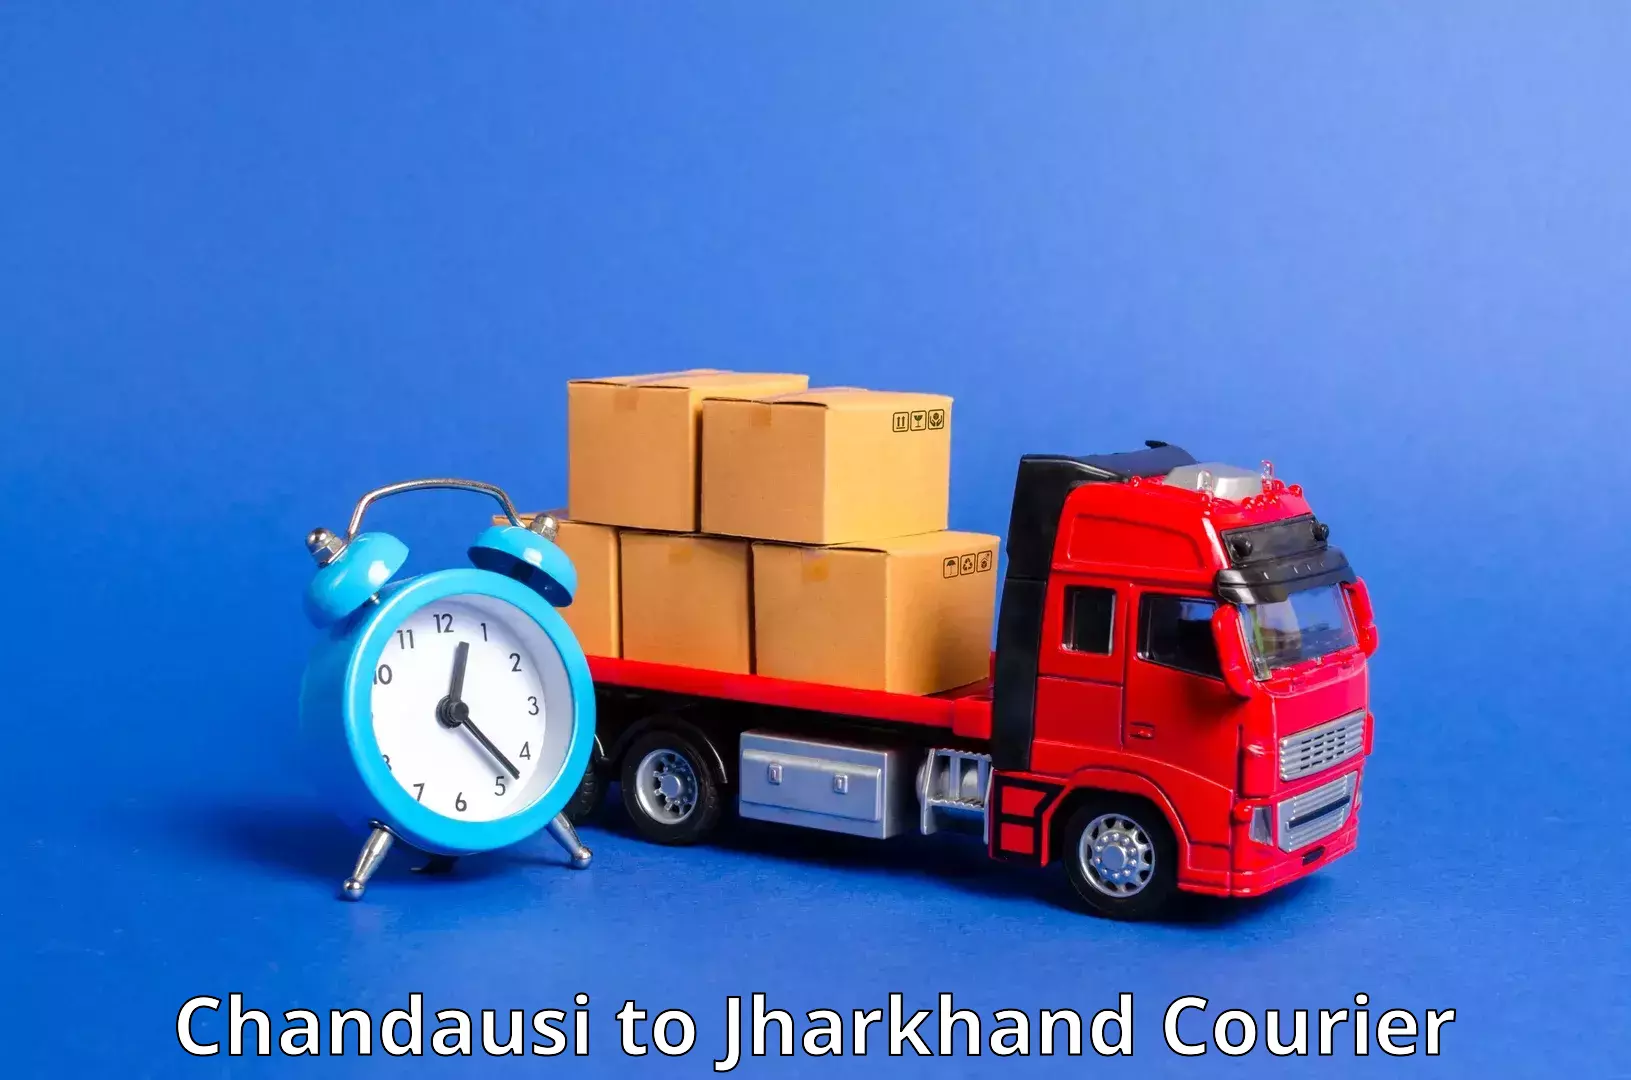 User-friendly courier app Chandausi to Jharkhand